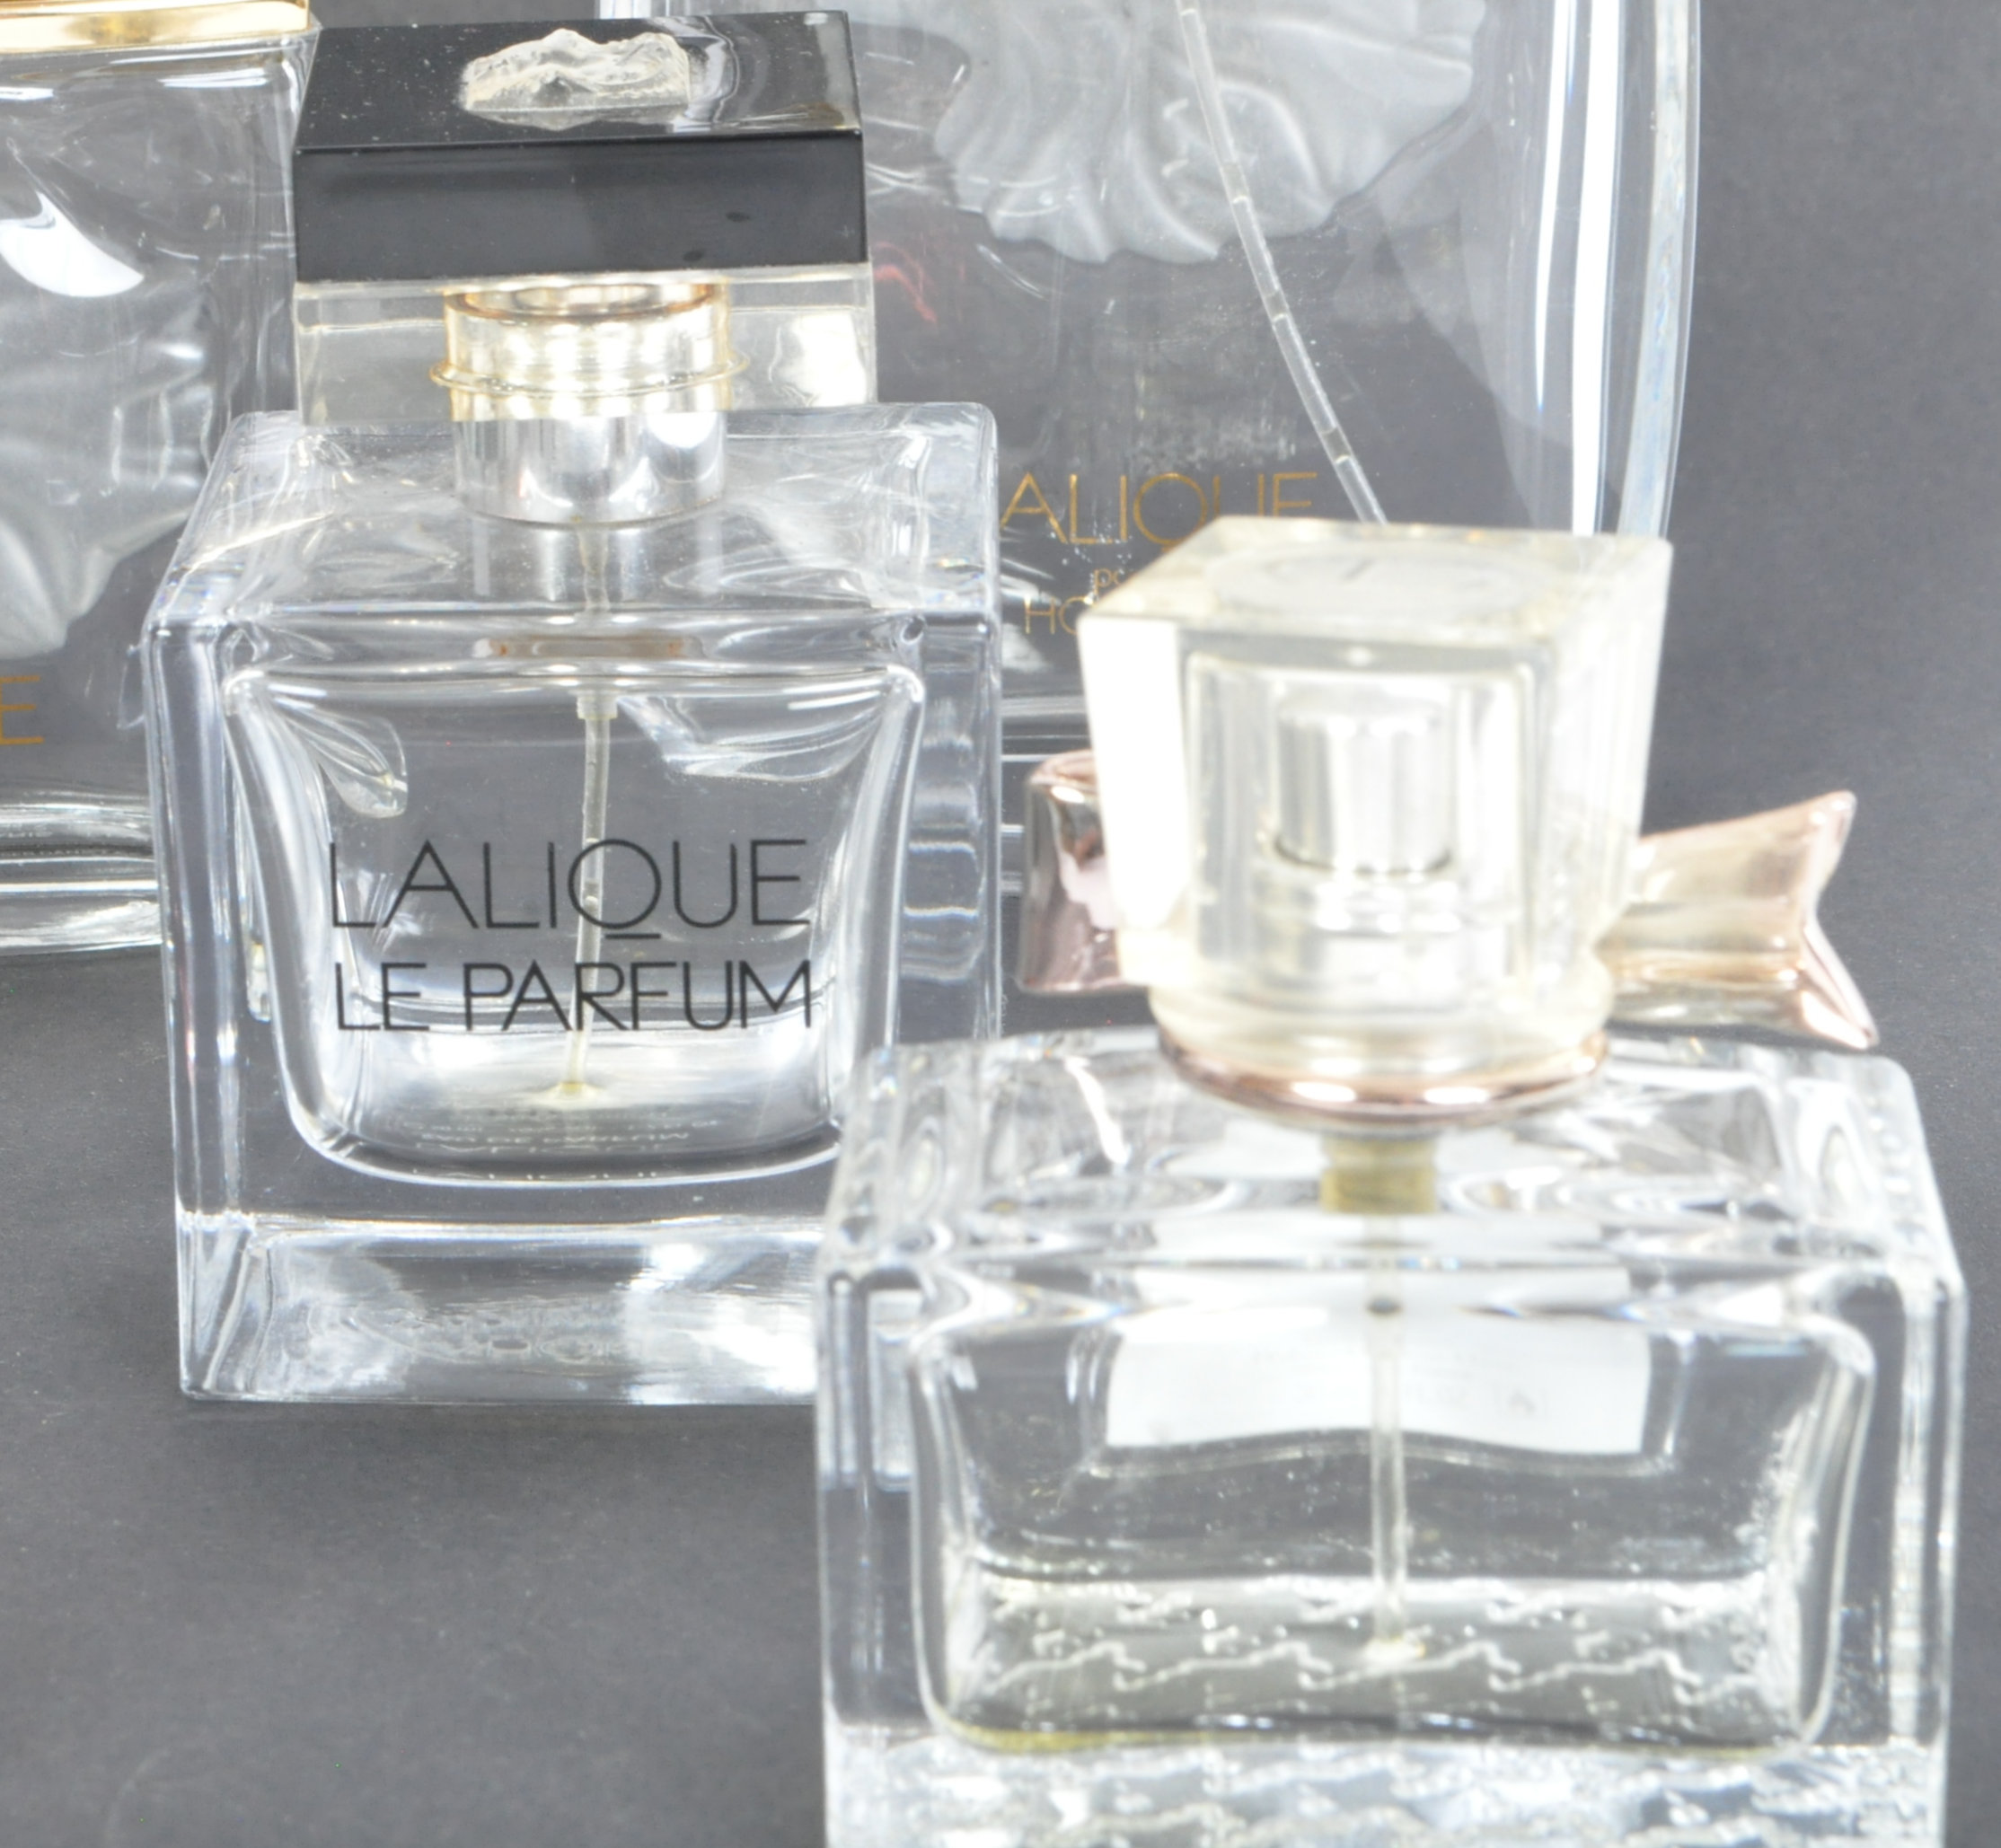 A COLLECTION OF LALIQUE BRANDED PERFUME BOTTLES - Image 4 of 5